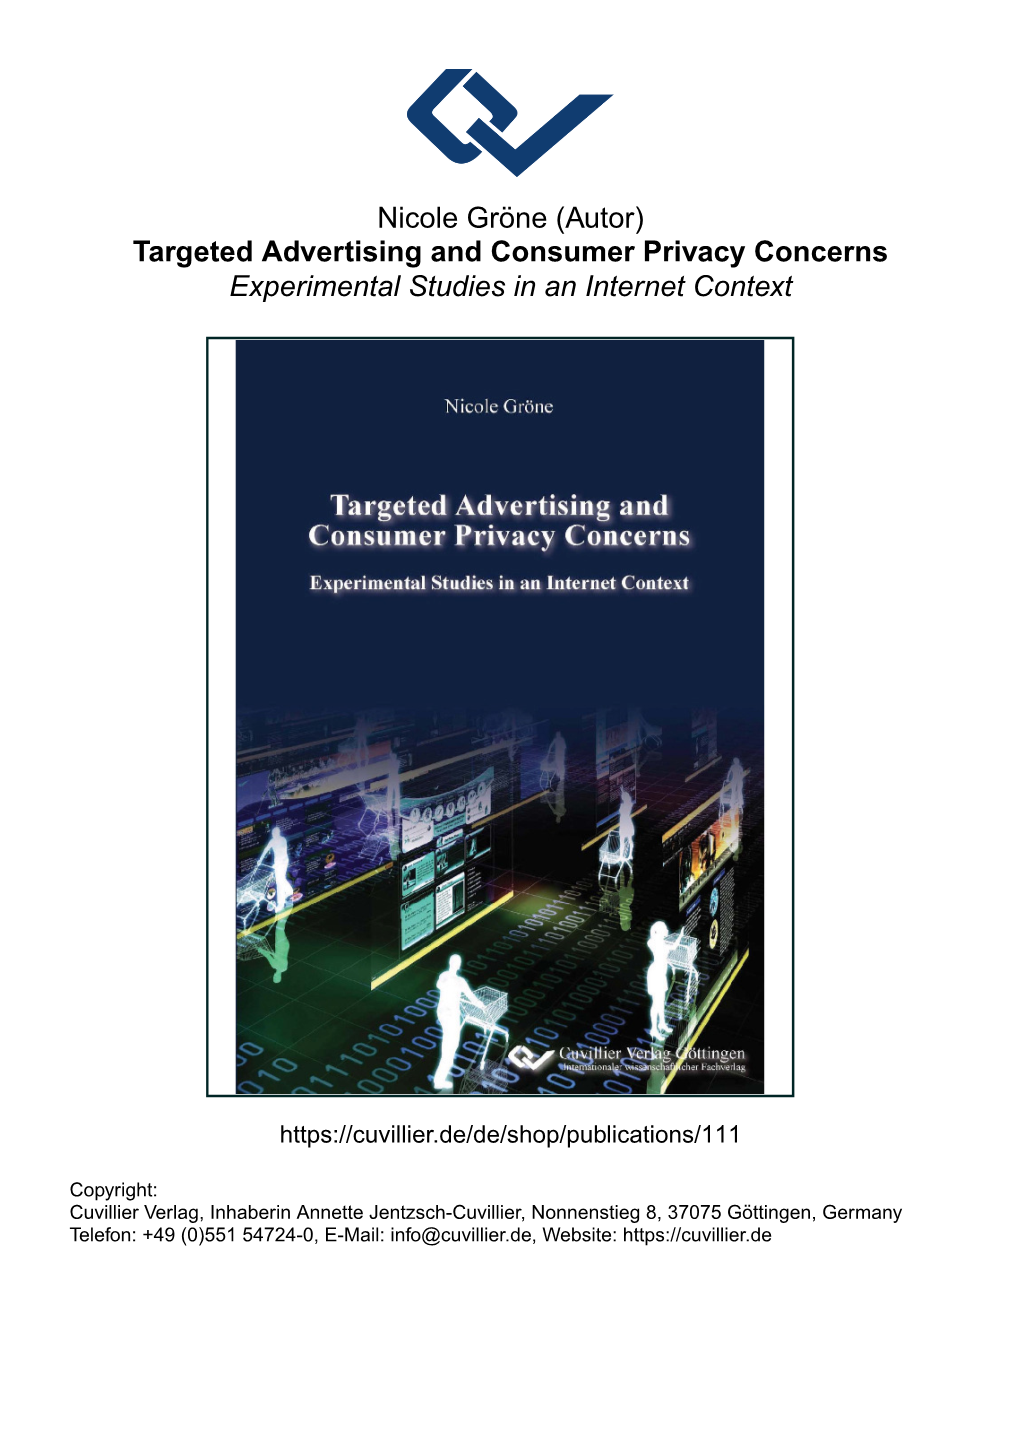 Targeted Advertising and Consumer Privacy Concerns Experimental Studies in an Internet Context